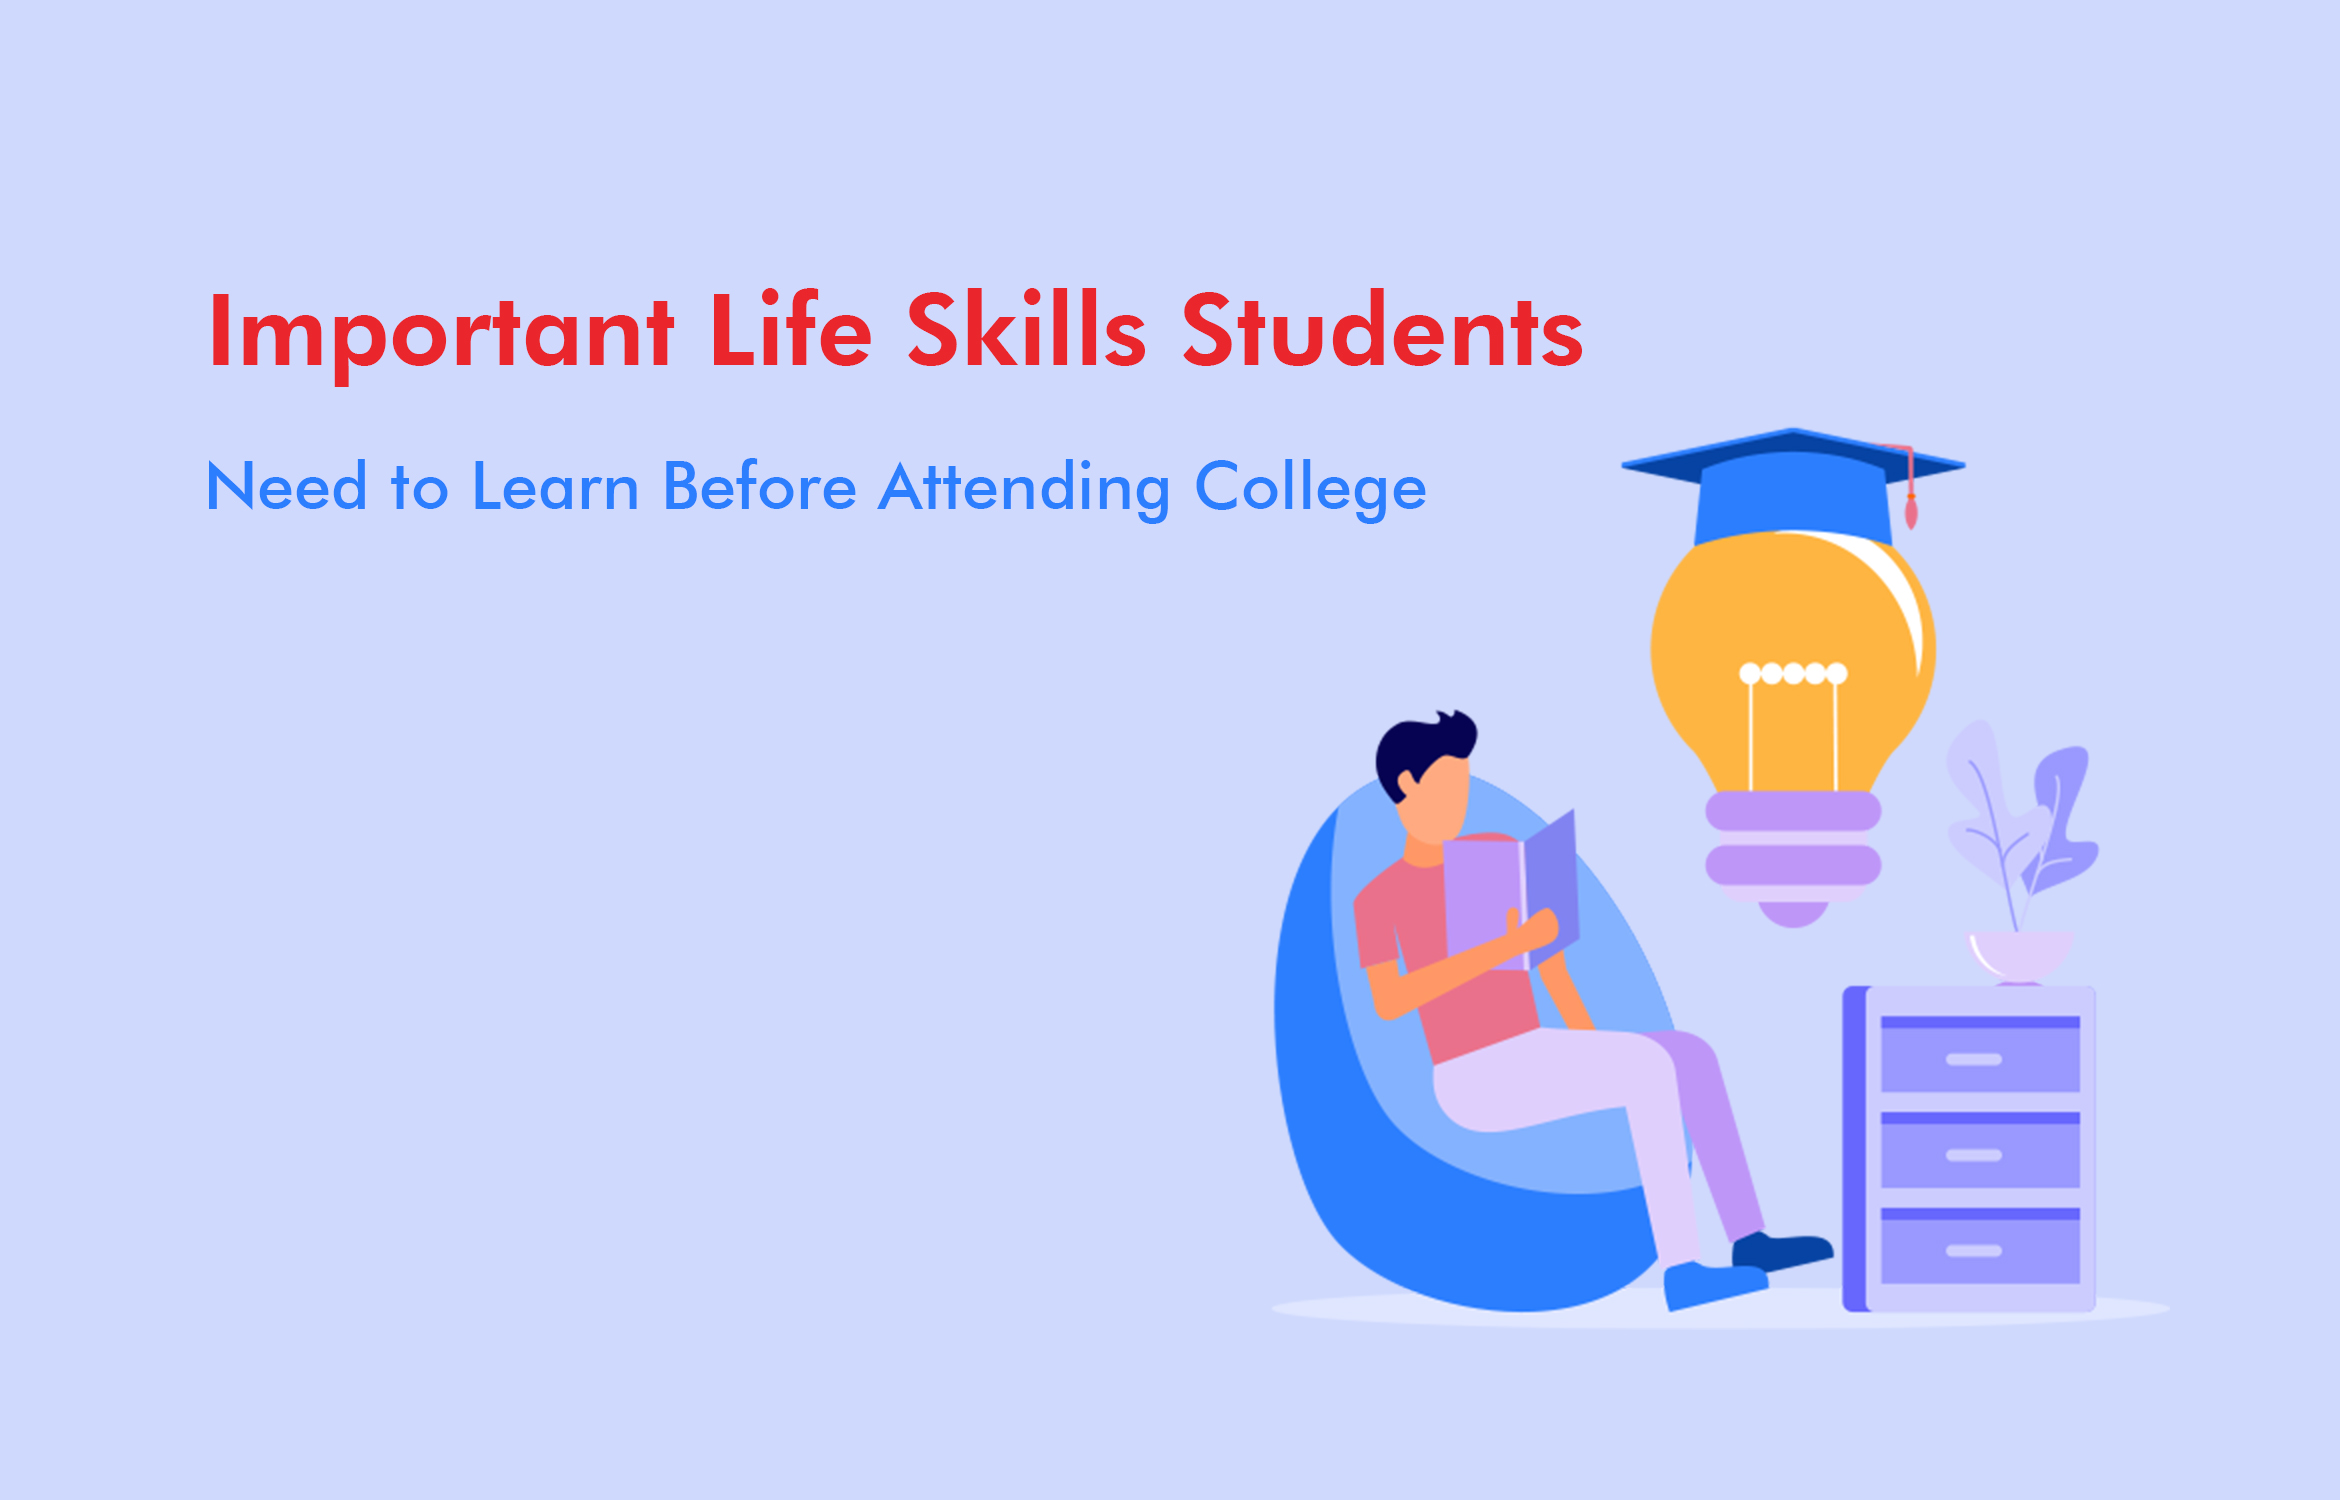 Important Life Skills Students Need to Learn Before Attending College